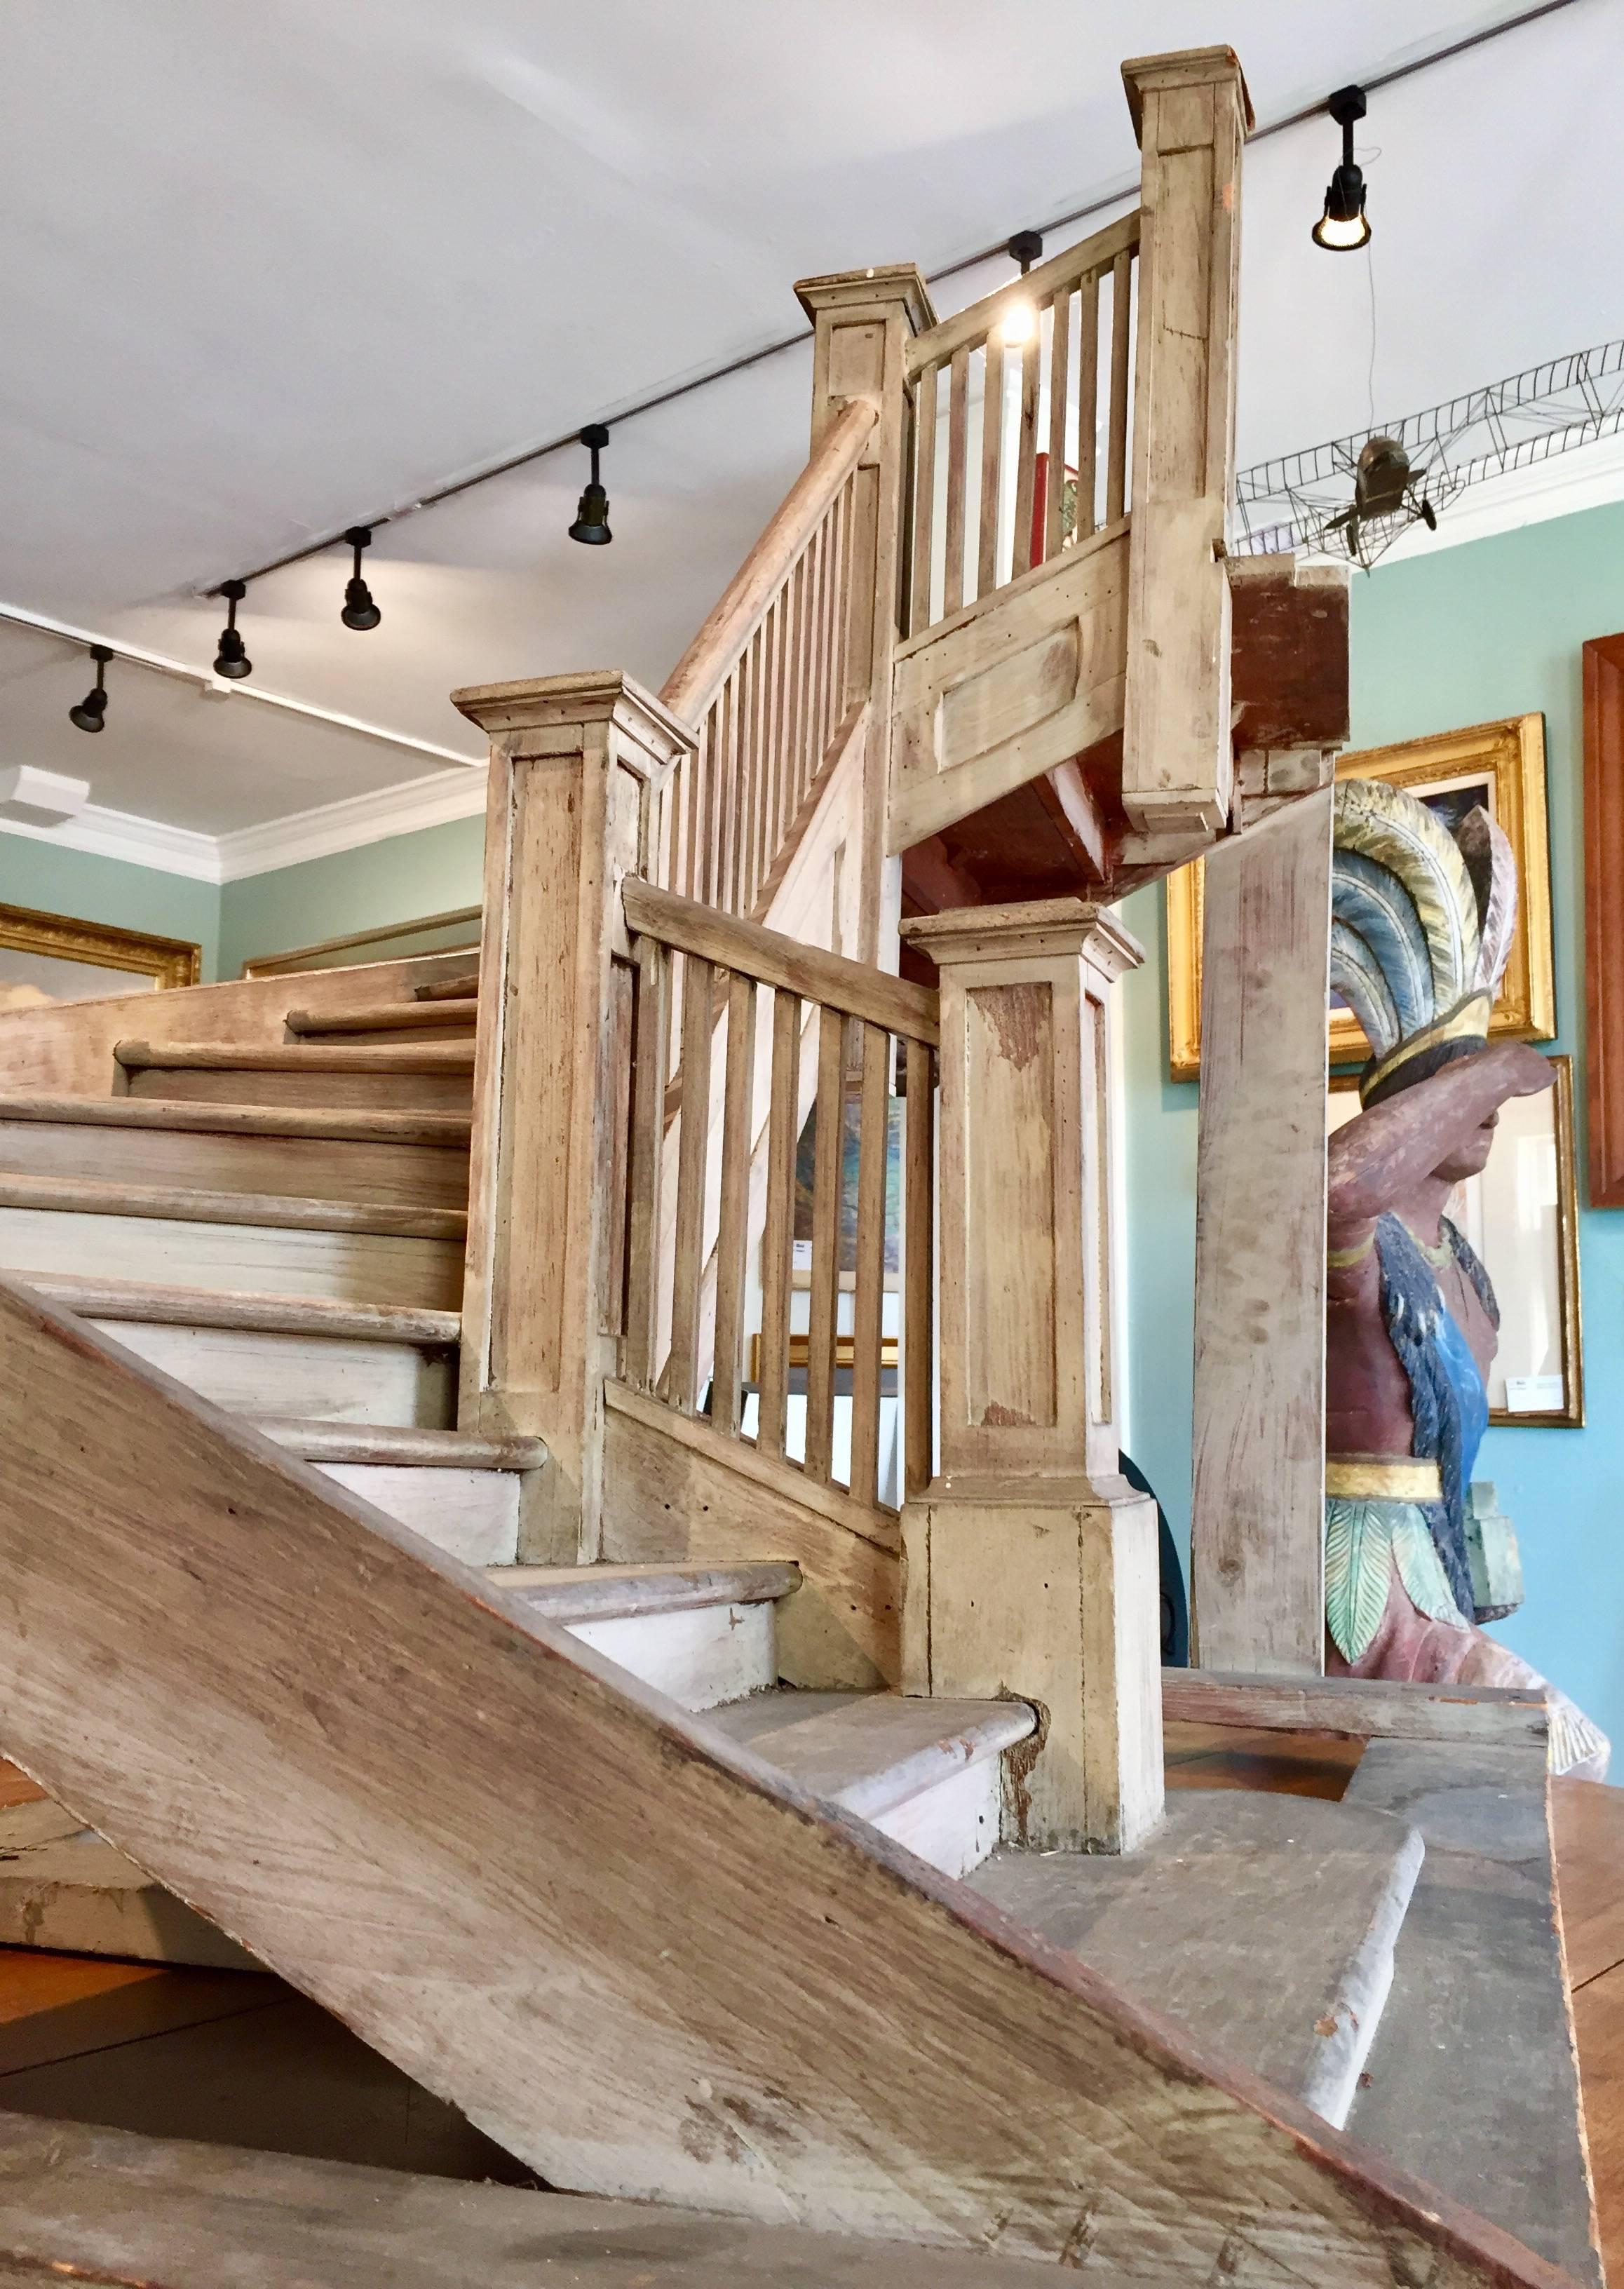 Great American 19th century large staircase model in old dry white/grey paint. Very impressive size. Could be used as a display, but very cool on its own. From upstate NY.